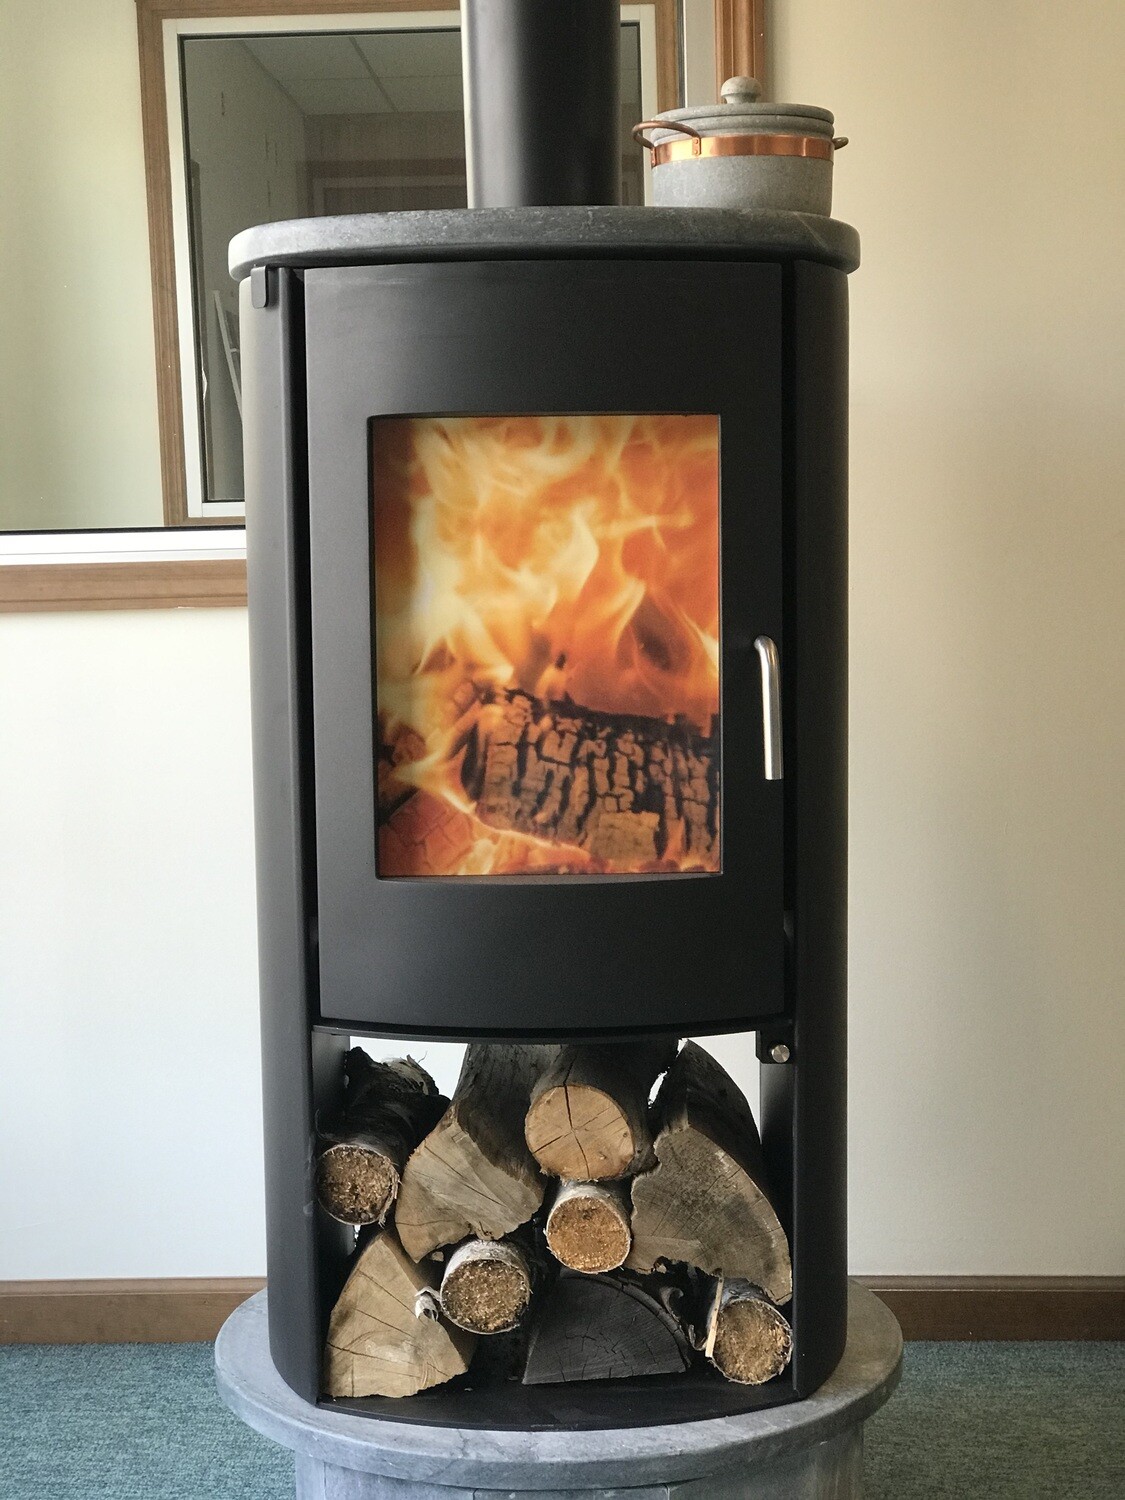 N-65S Wood Stove with Soapstone